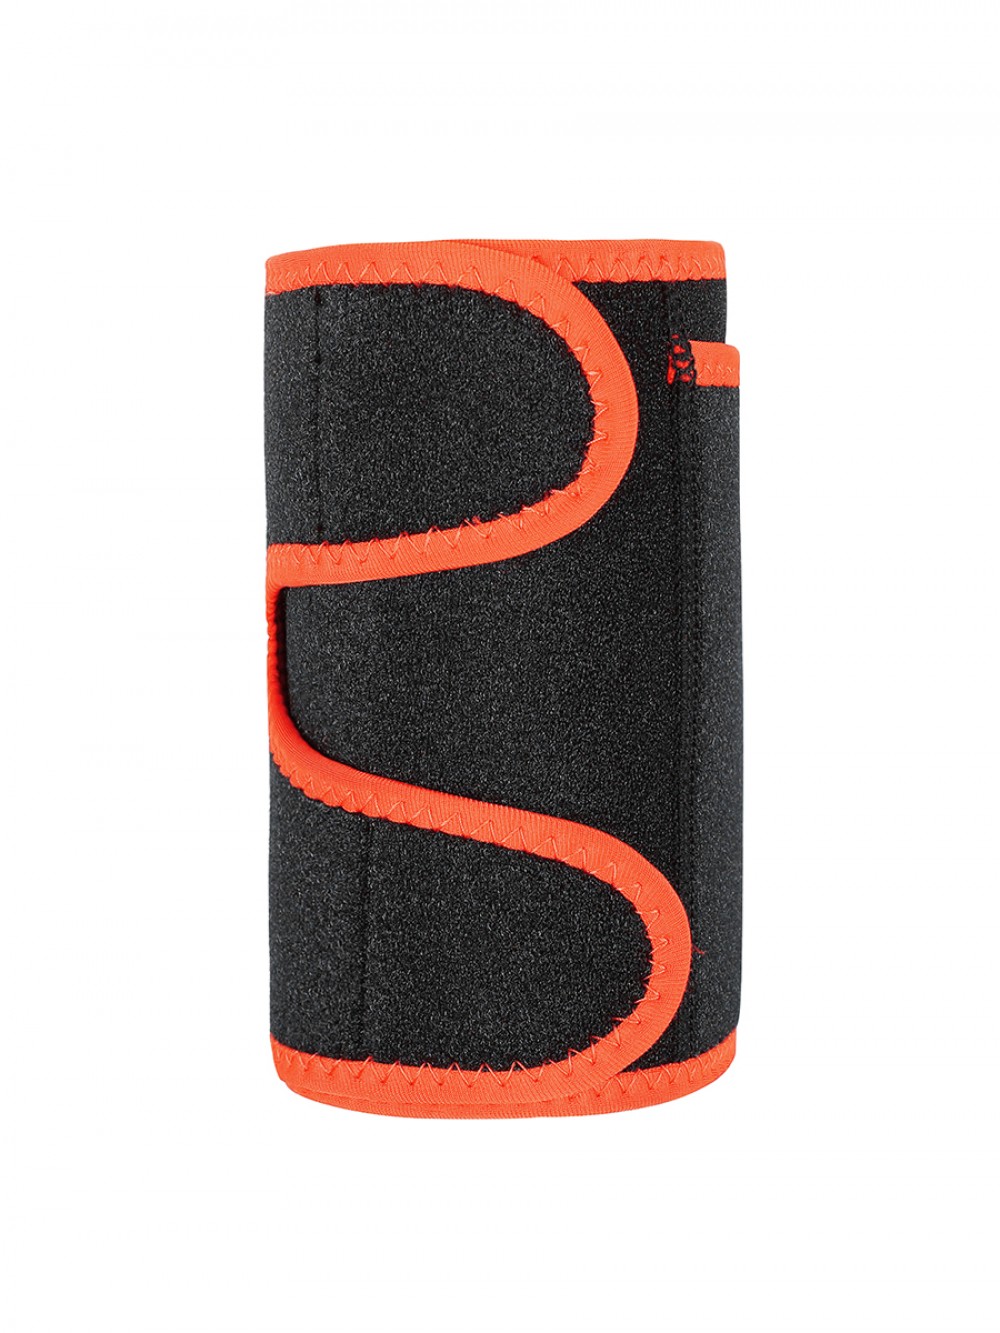 Orange 2Pcs Neoprene Arm Trimmers With Pockets Weight Loss